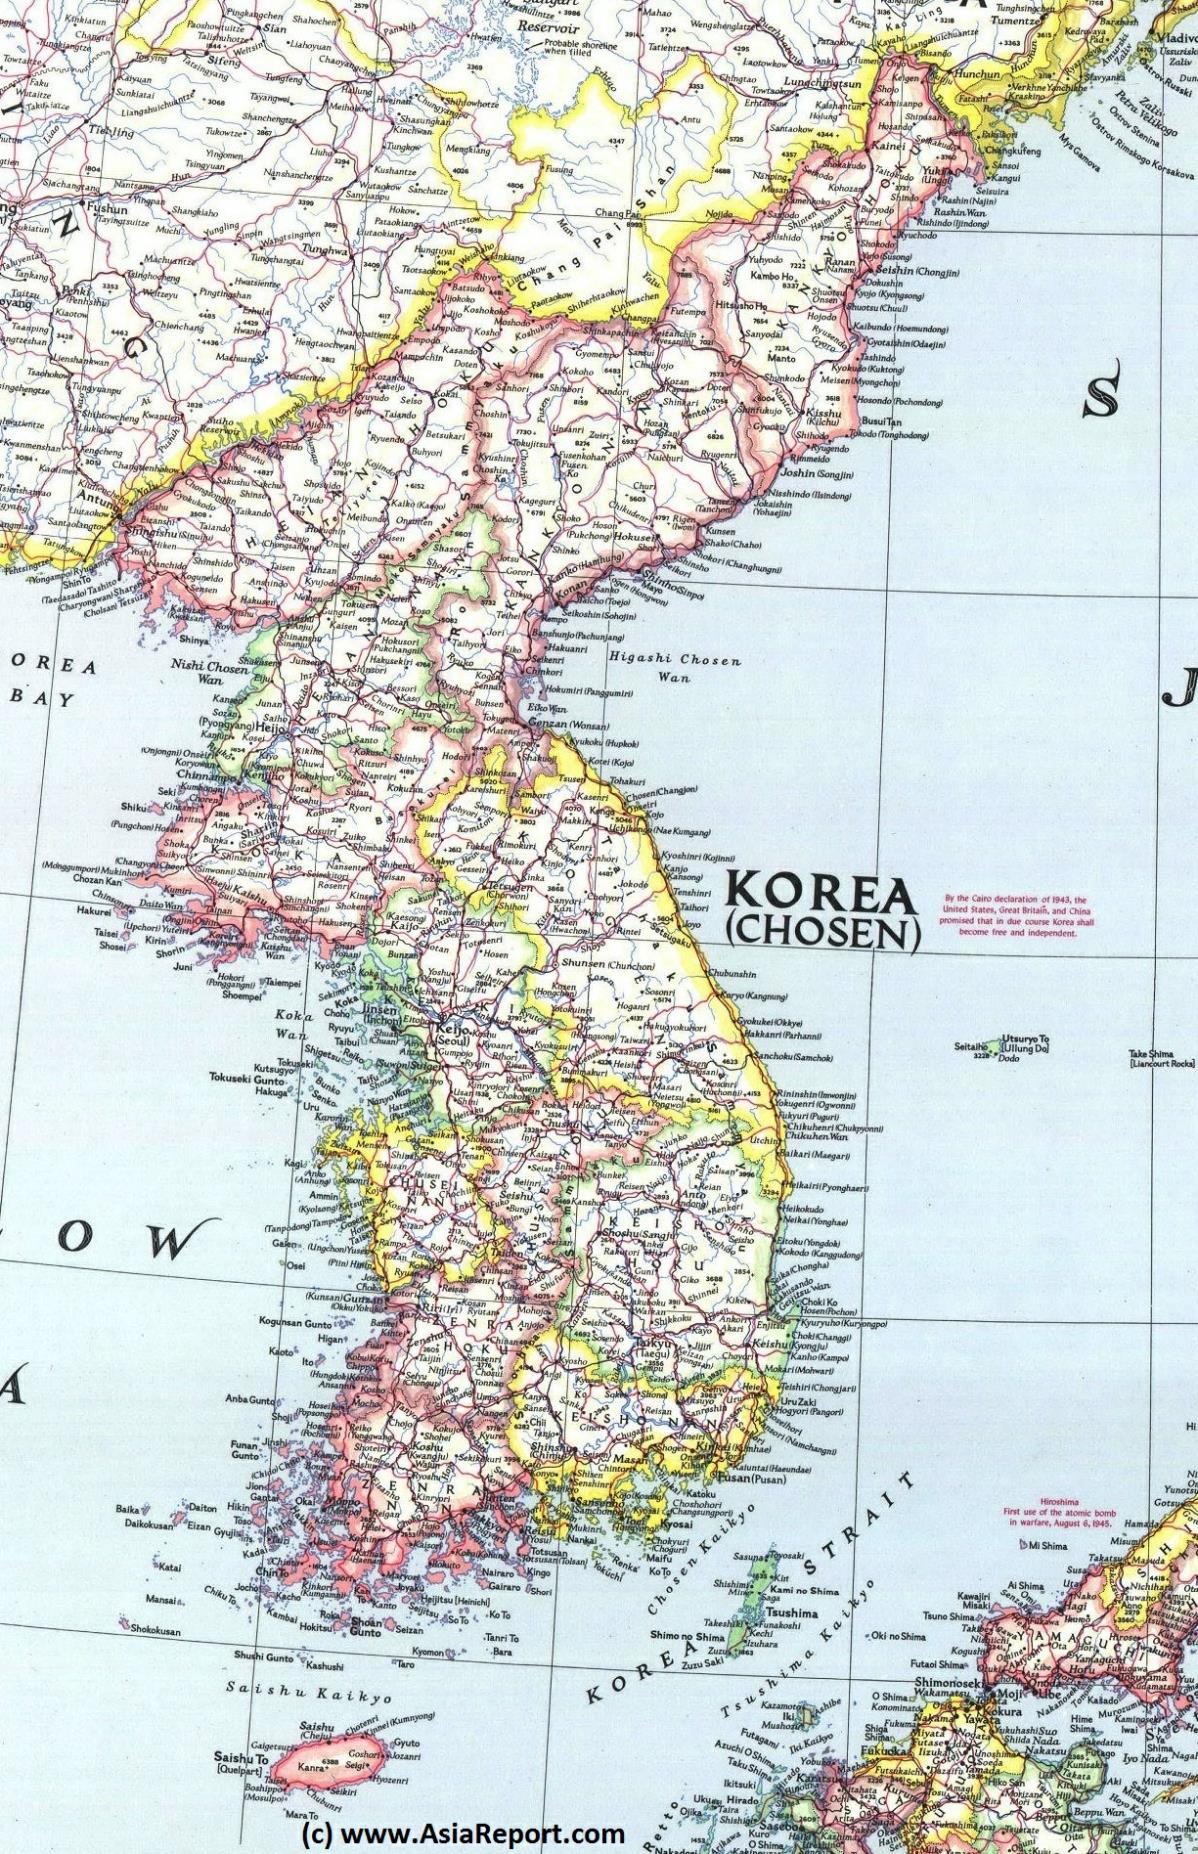 Click within Red Marker Line to Advance to Korea Map 1945 (higher resolution!)